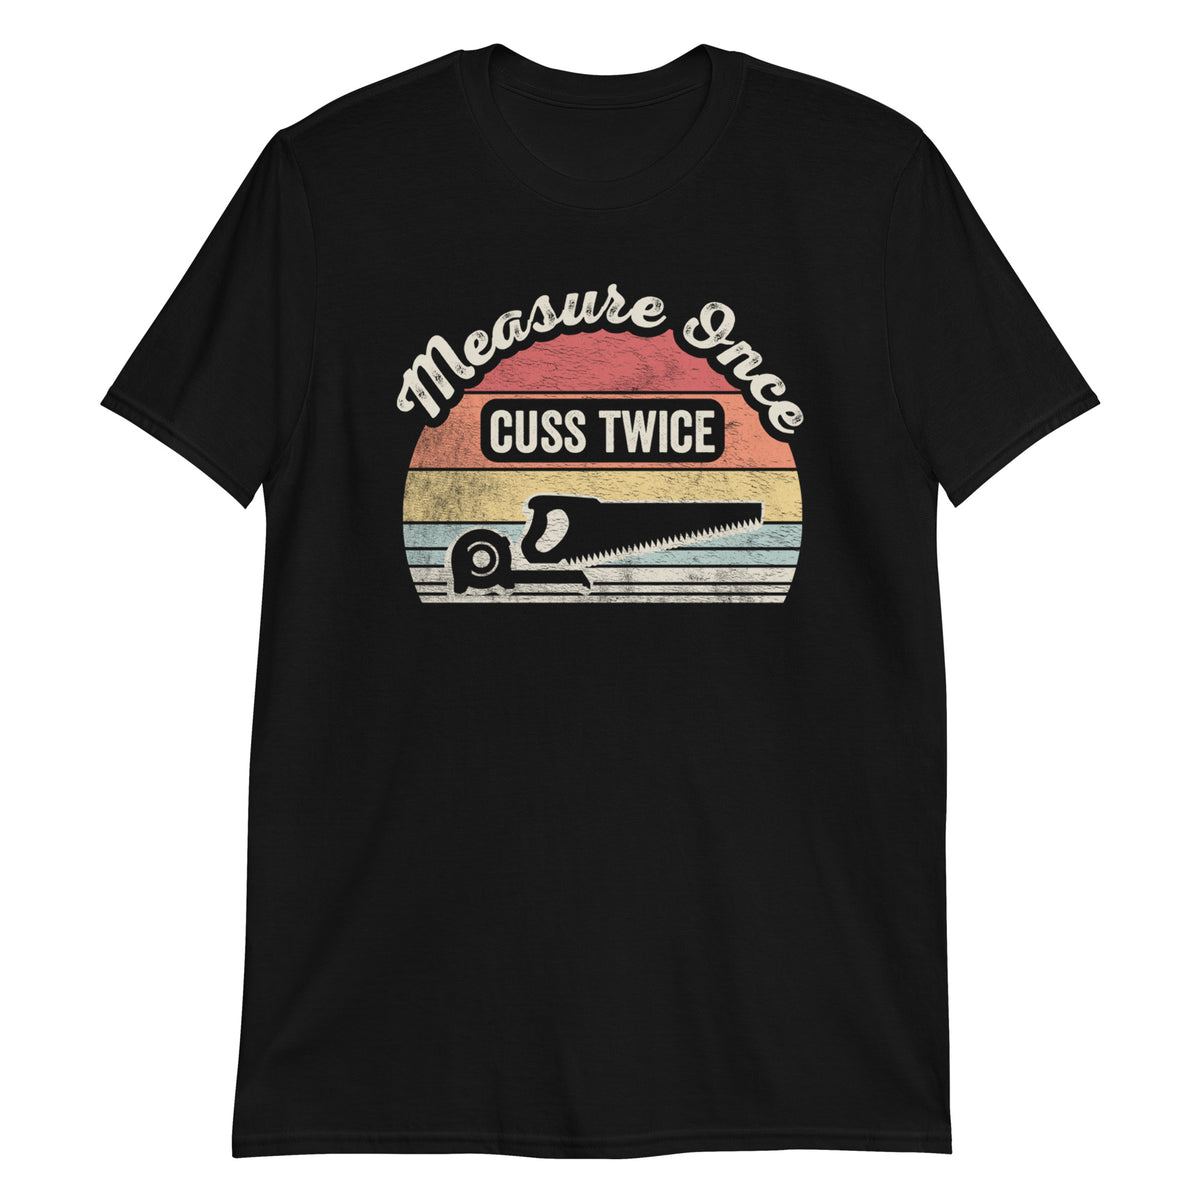 Measure Once Cuss Twice Shirt Construction Worker Gift Funny T-Shirt